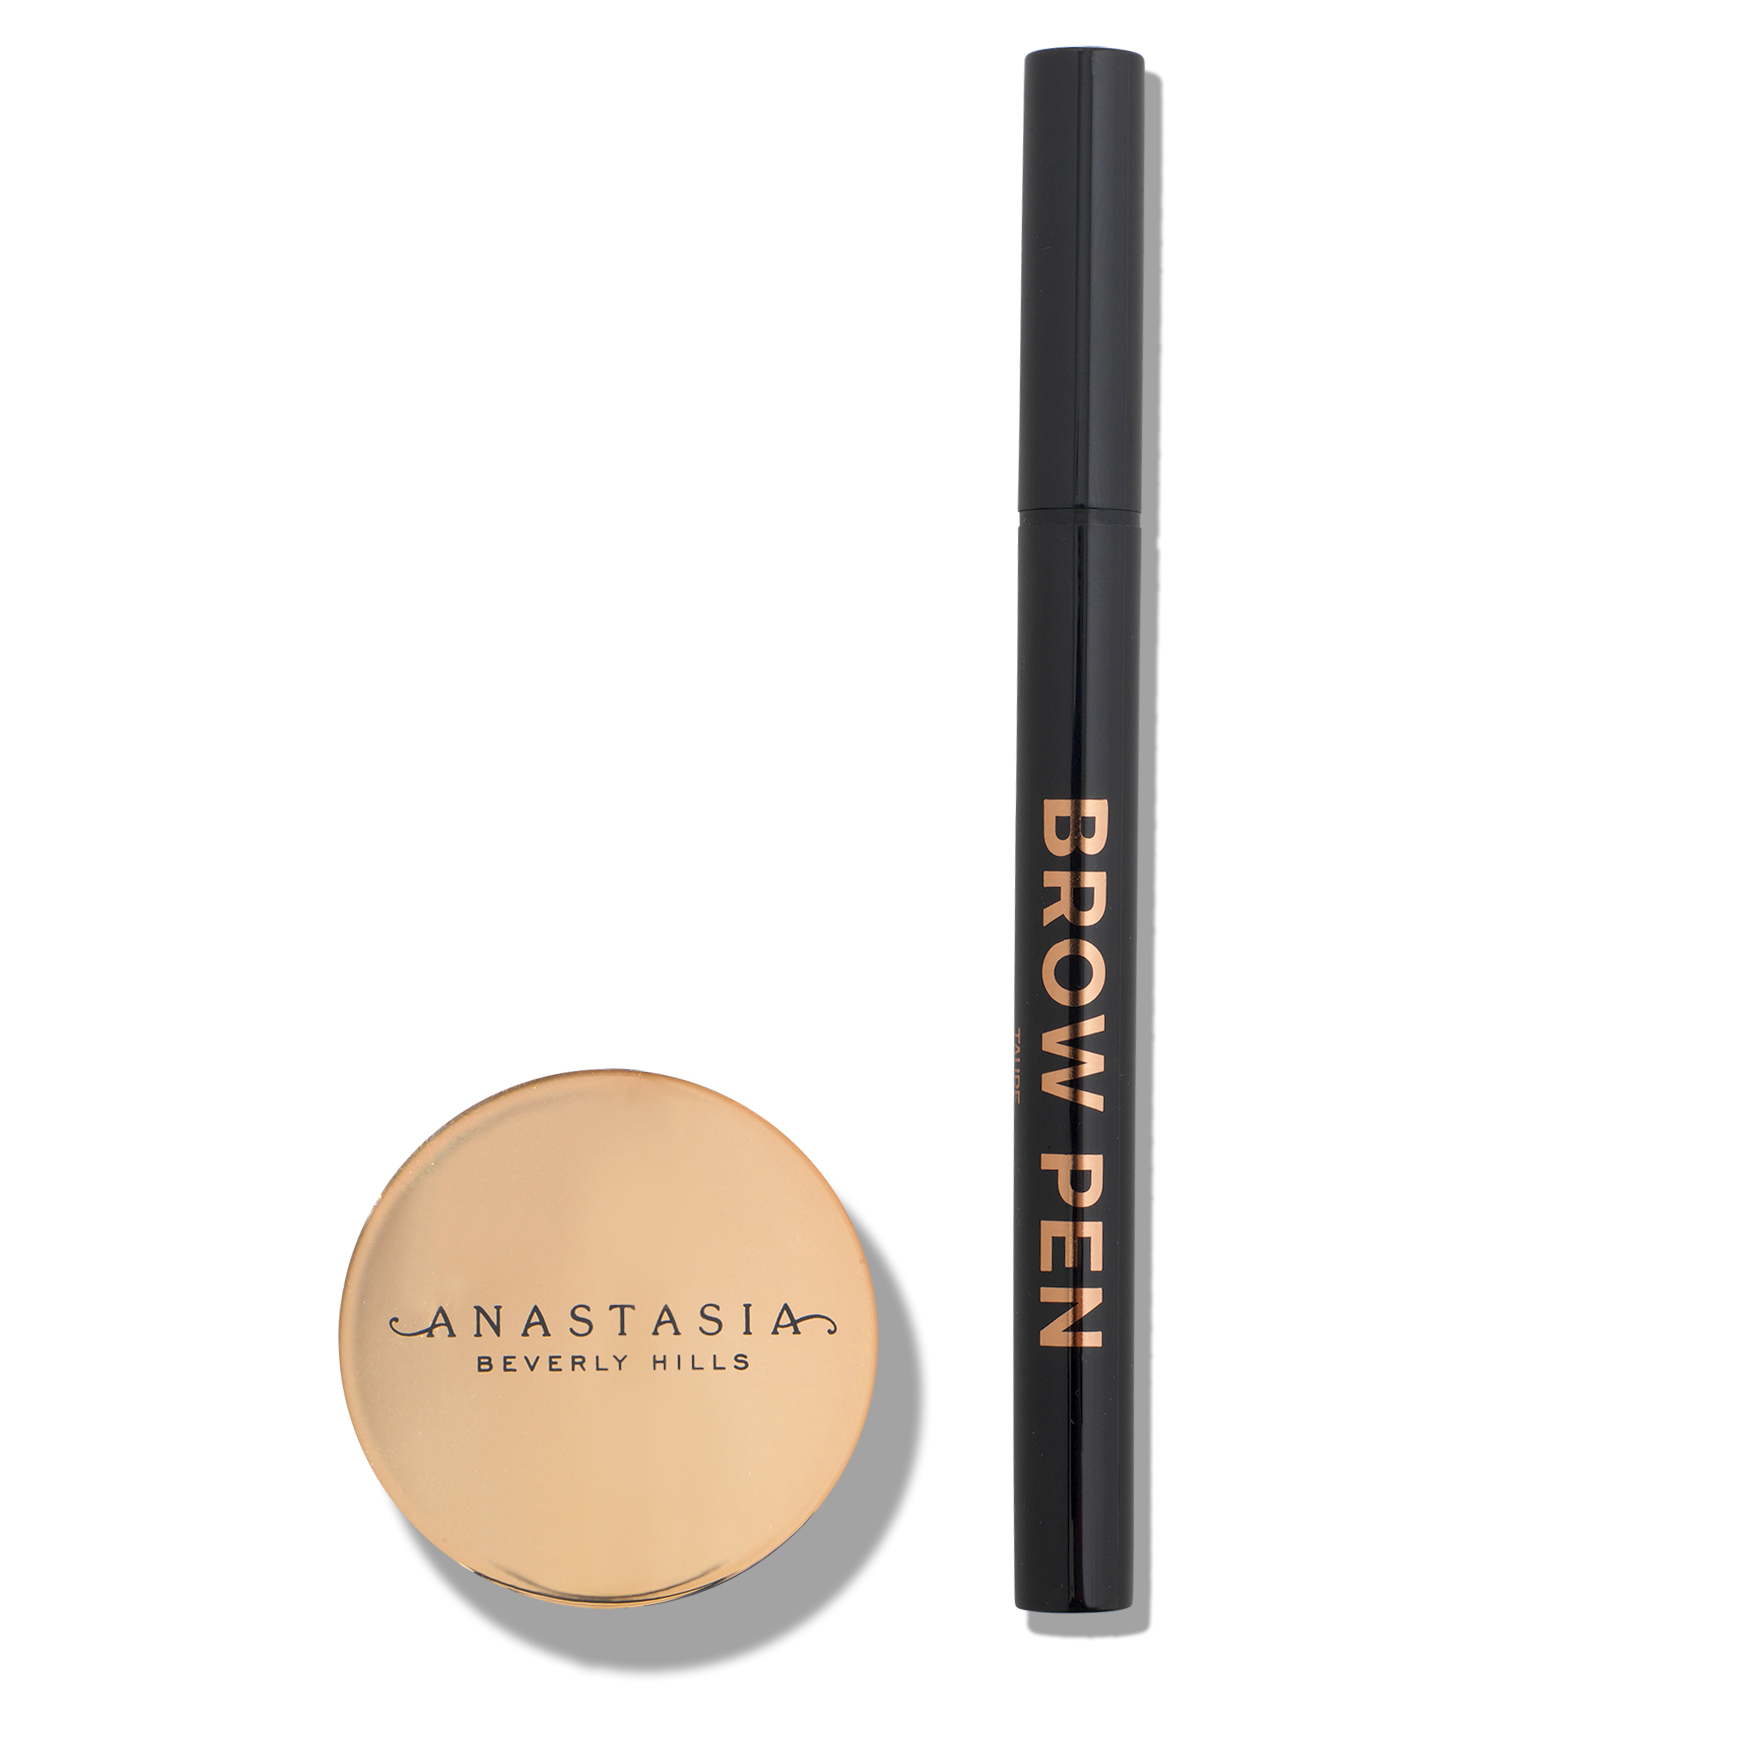 Anastasia Beverly Hills Laminated Look Brow Kit | Space NK